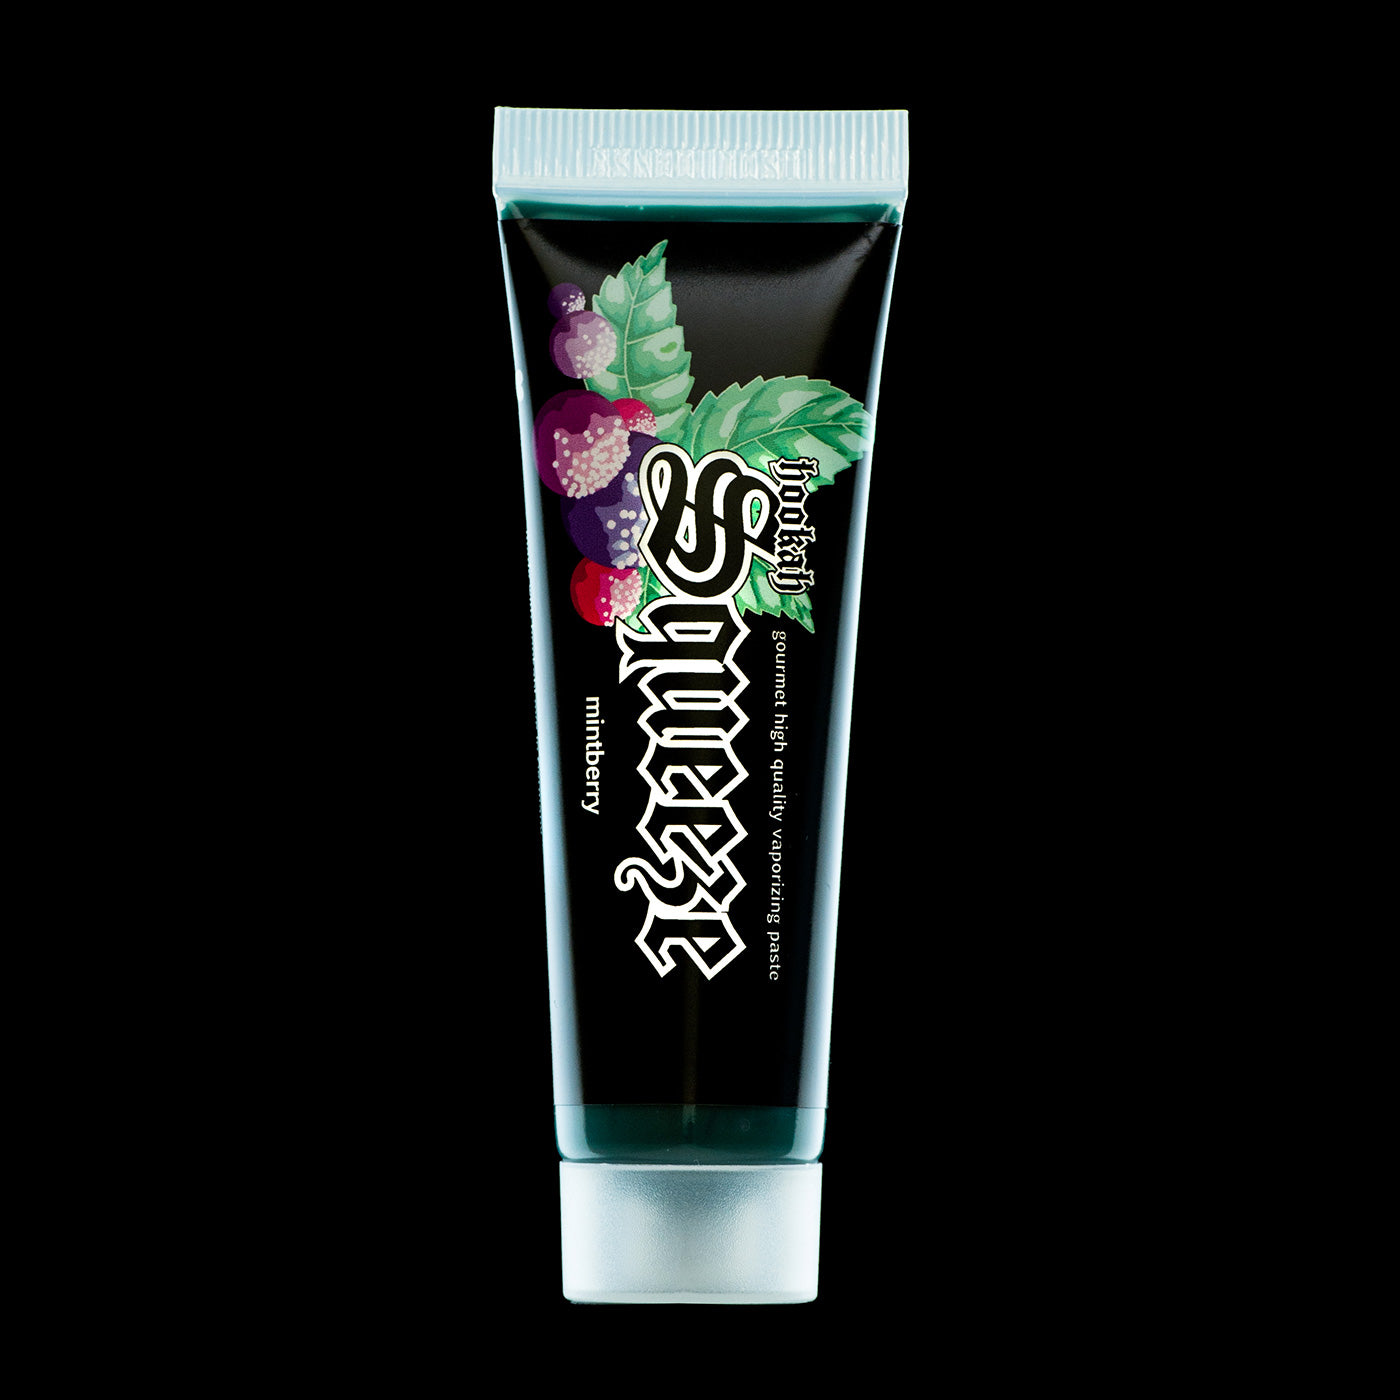 Hookah Squeeze 25g Nicotine Free - Mintberry